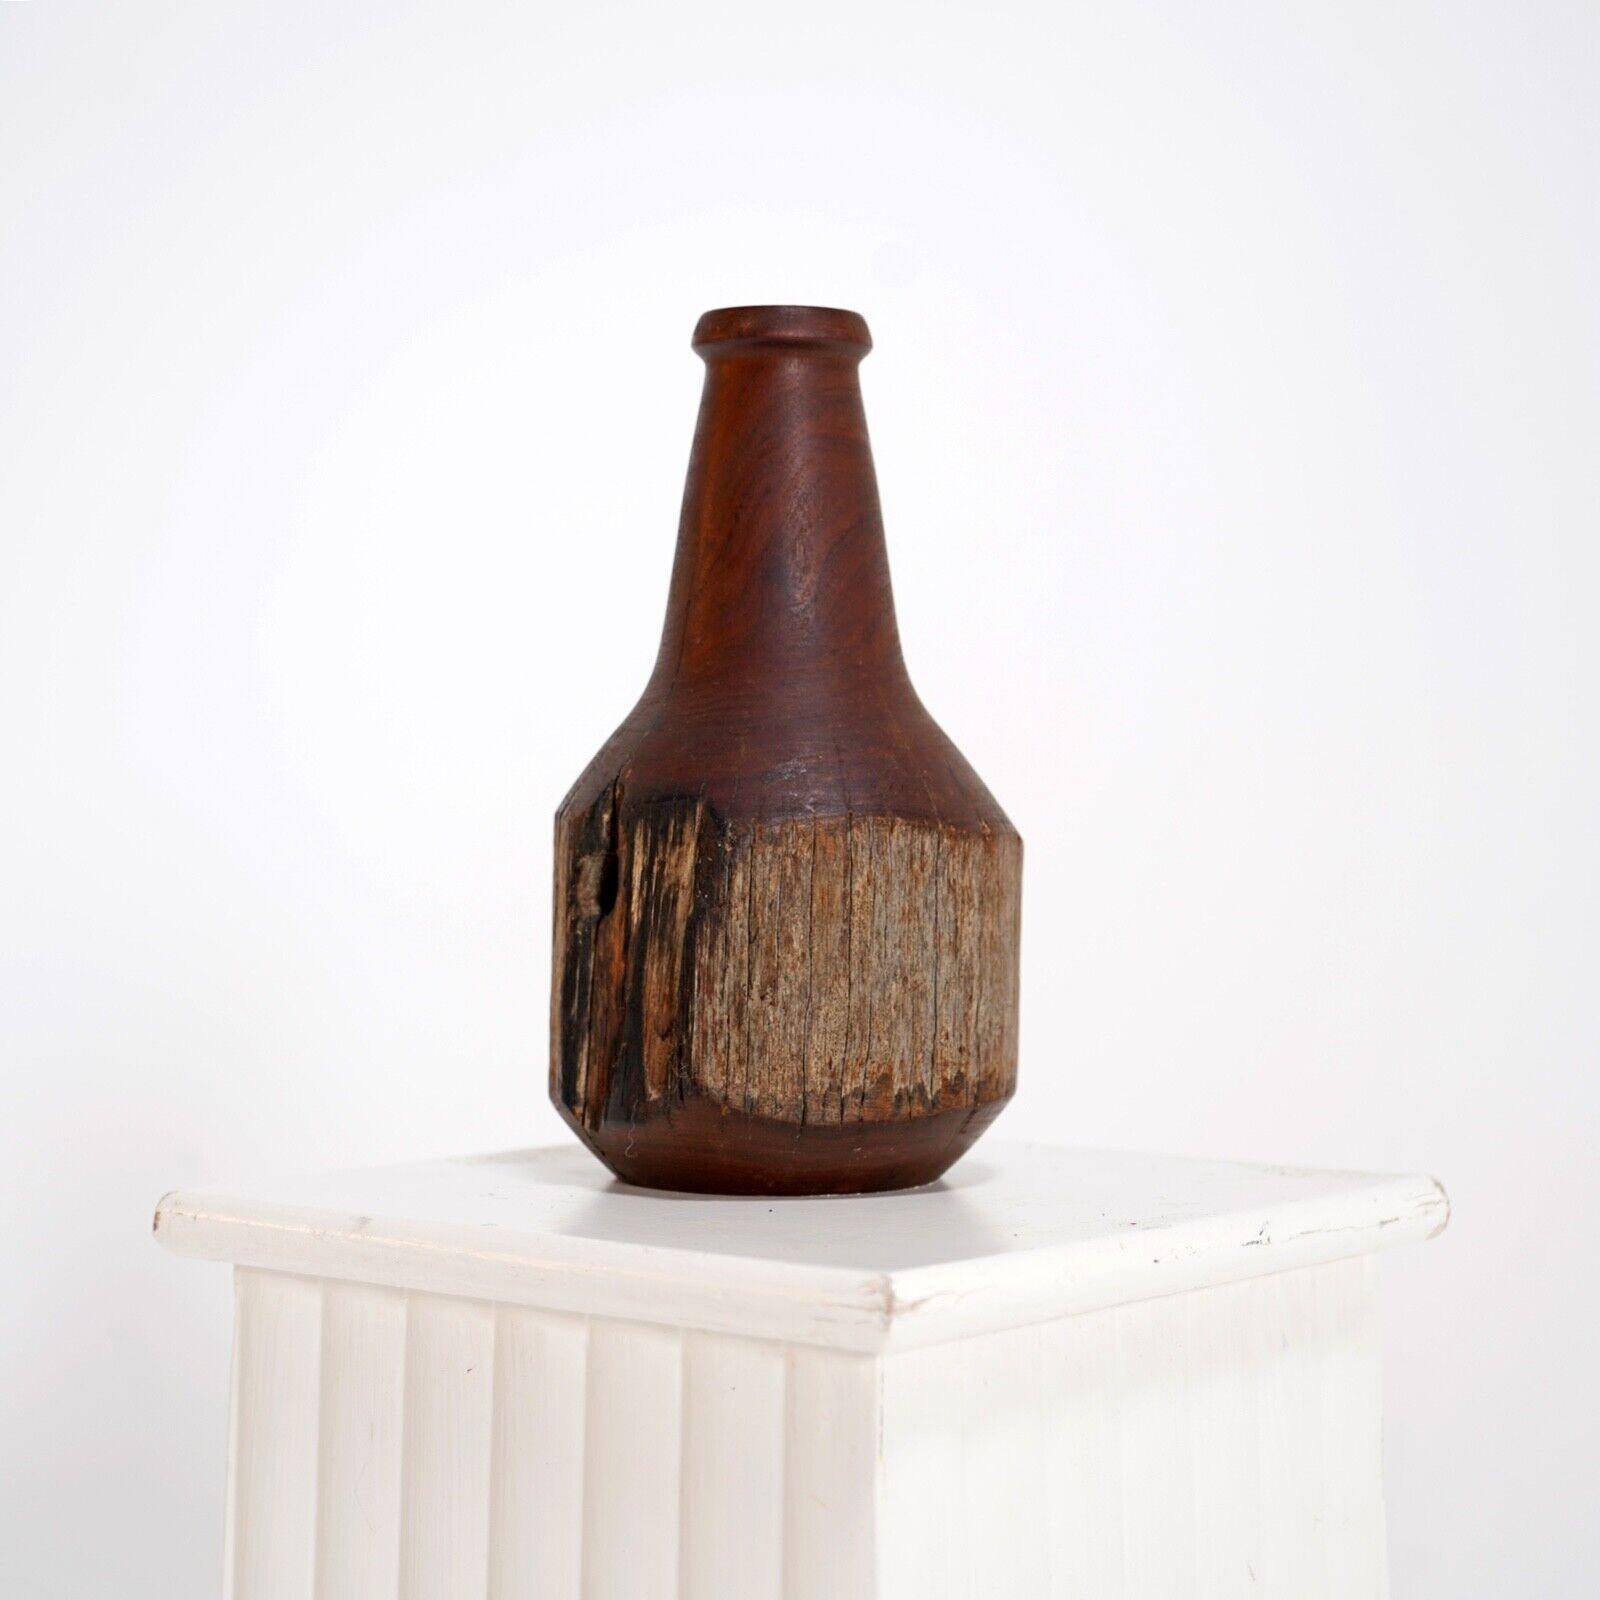 Hand-Carved Turned Wooden Sculpture of a Bottle For Sale